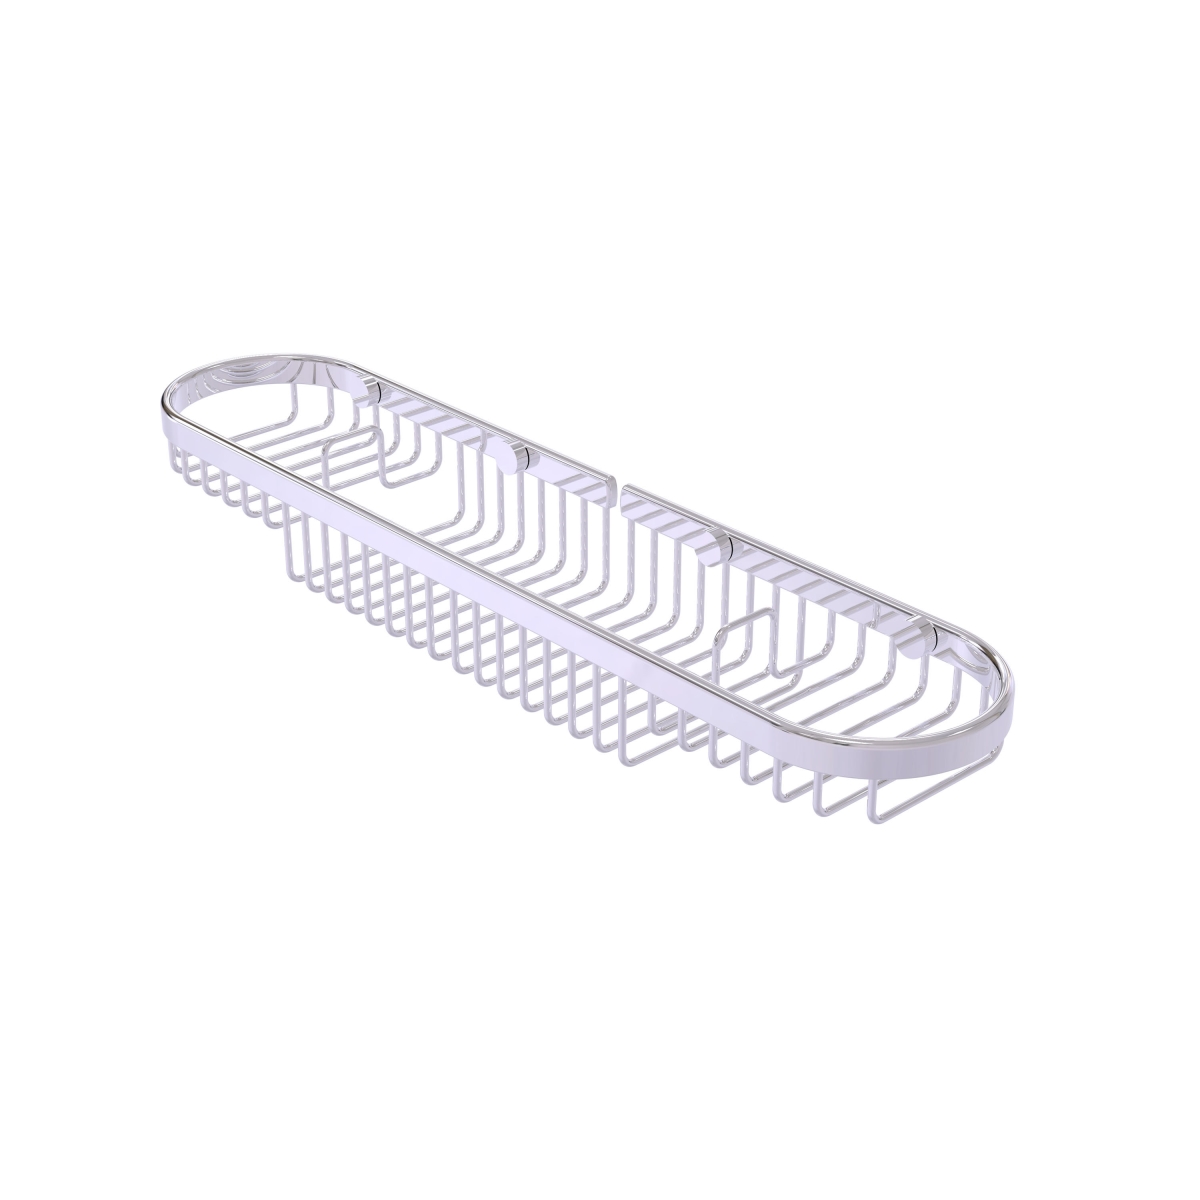 Picture of Allied Brass BSK-275LA-PC Oval Combination Shower Basket, Polished Chrome